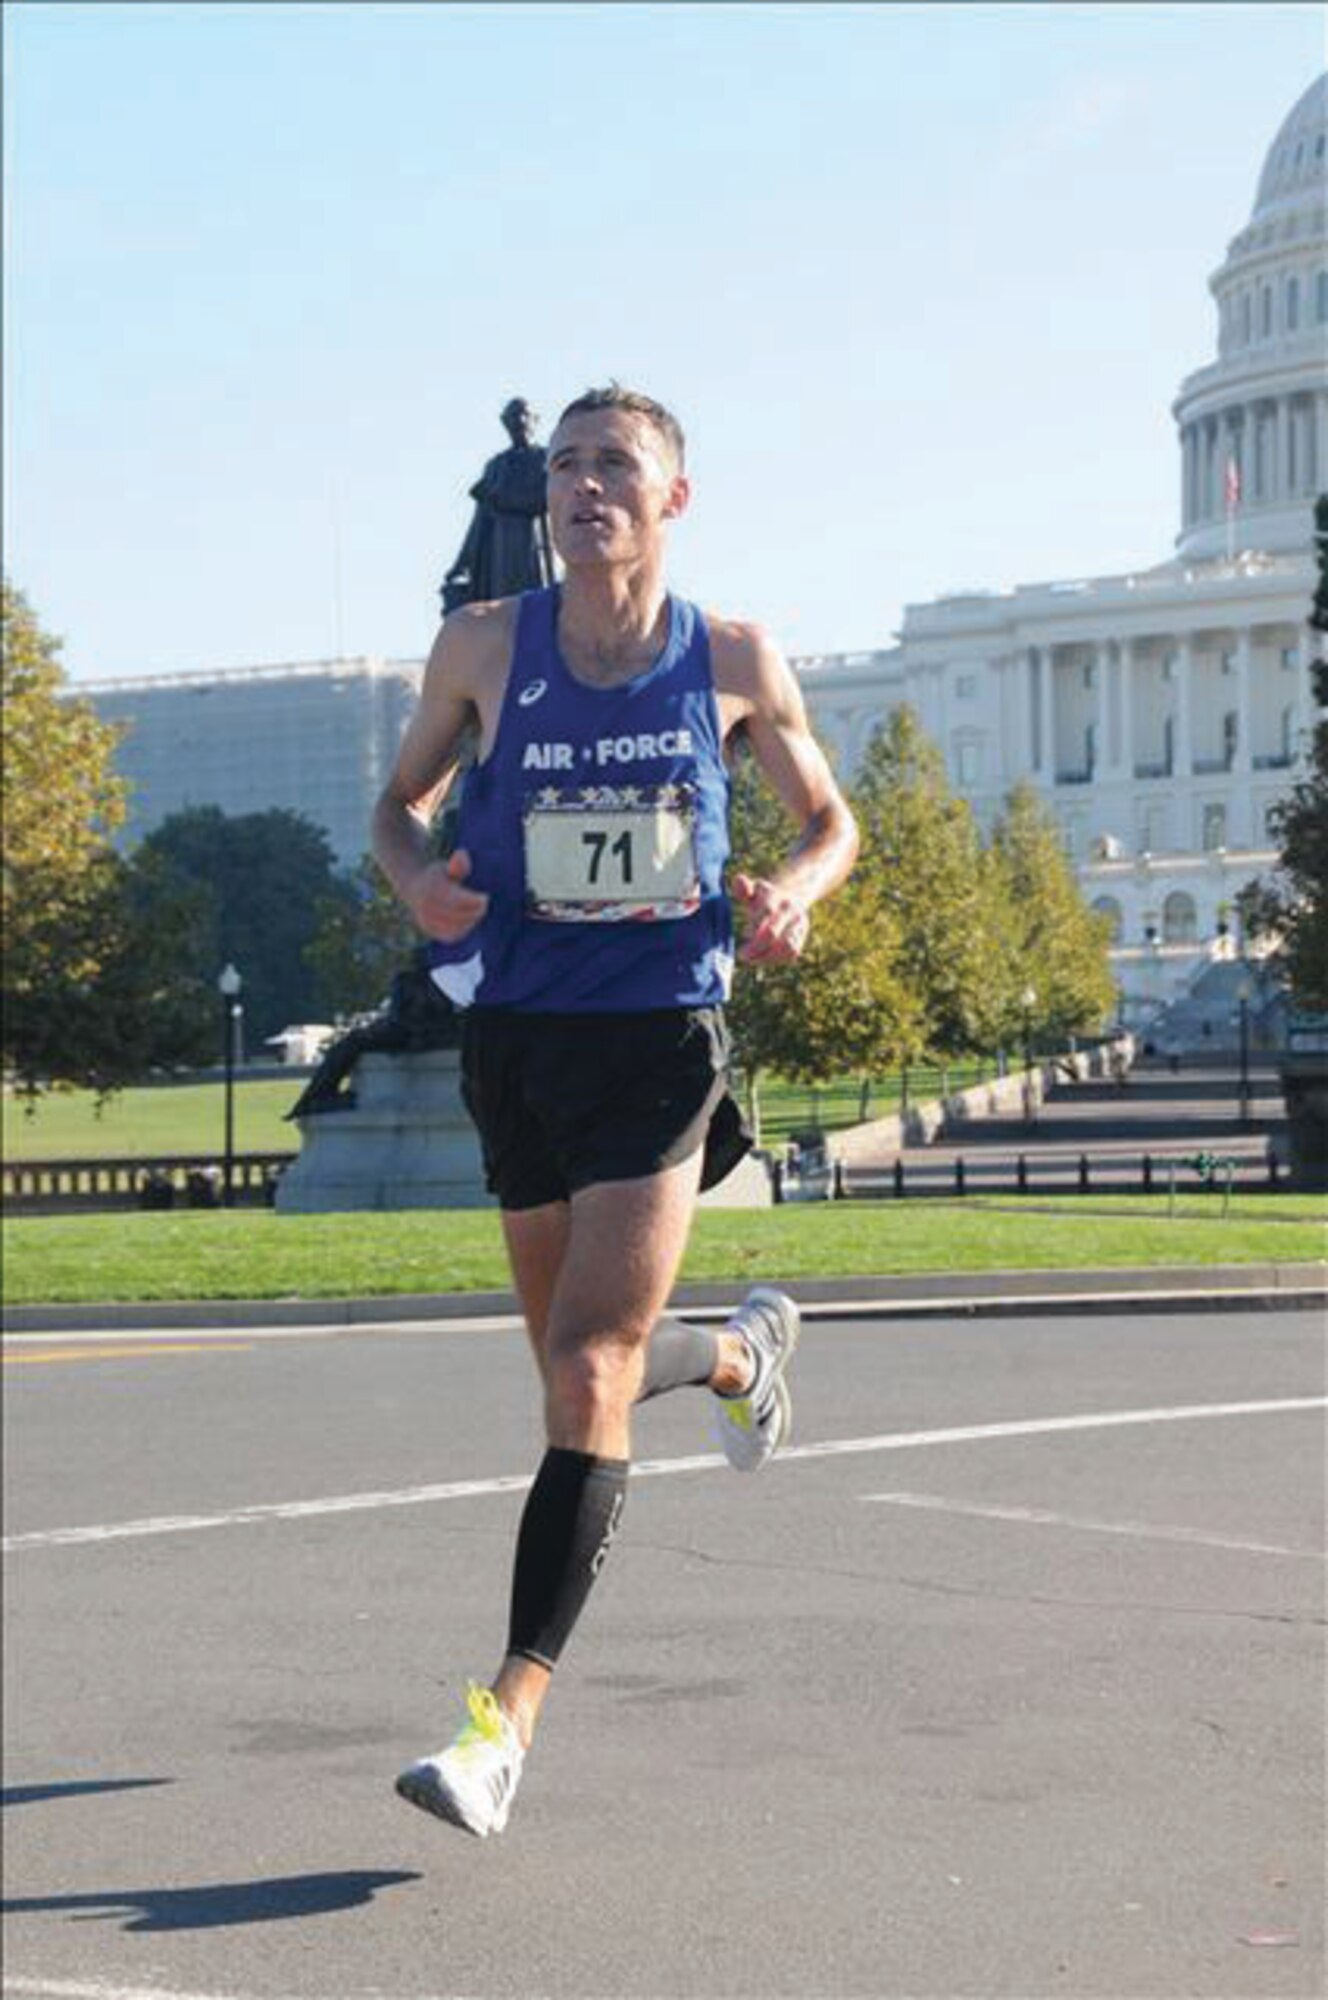 Capt. Kristopher Houghton of the 377th Air Base Wing Judge Advocate General office was a member of the Air Force Marathon Team and brought home the first-place finish for the Armed Forces Marathon Championship with a time of 2:28:28.